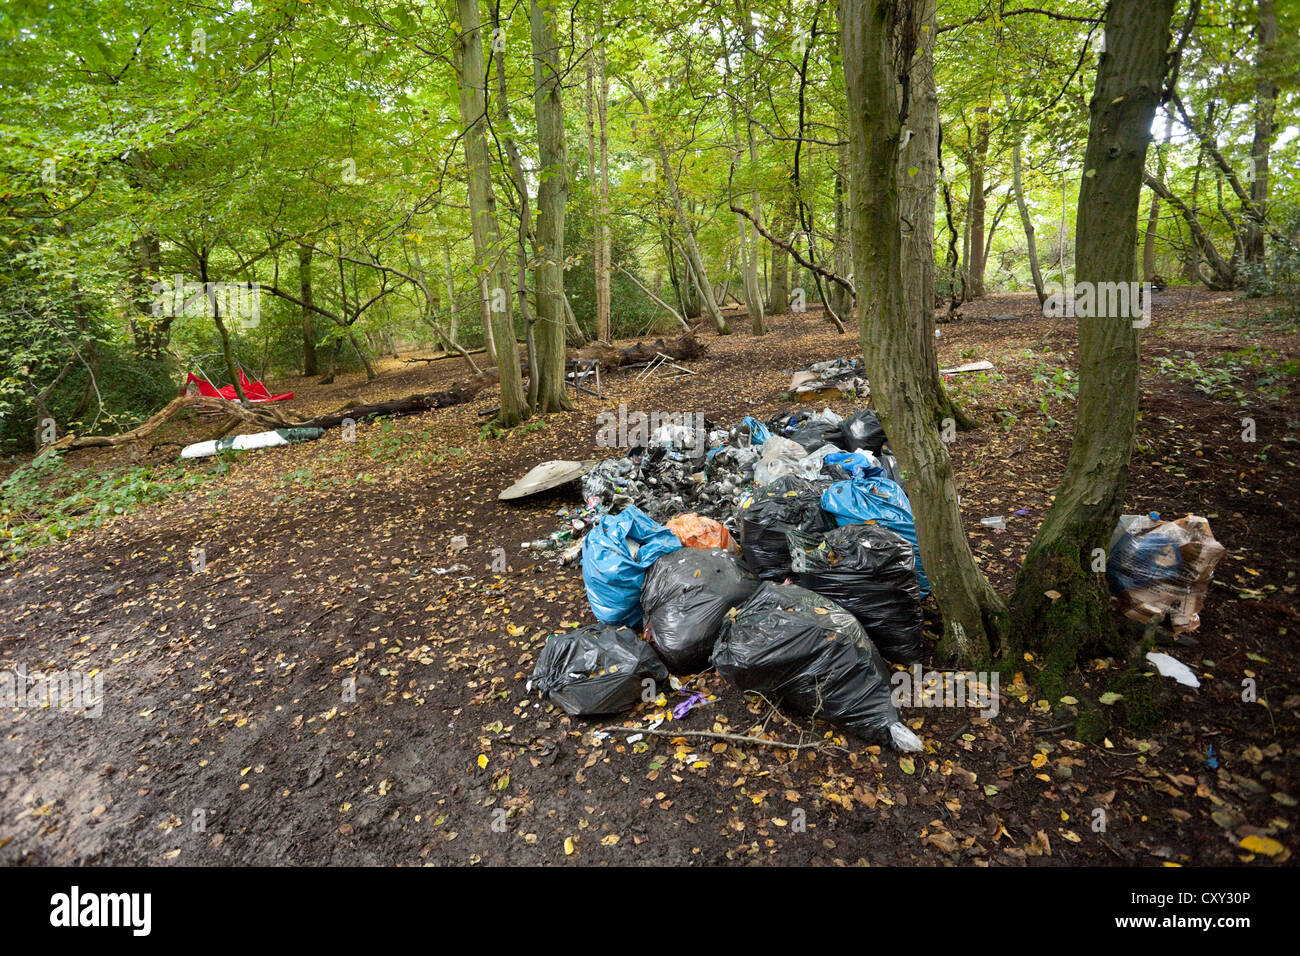 Rubbish bags left in a country park, Borehamwood, Hertfordshire, England, UK Stock Photo